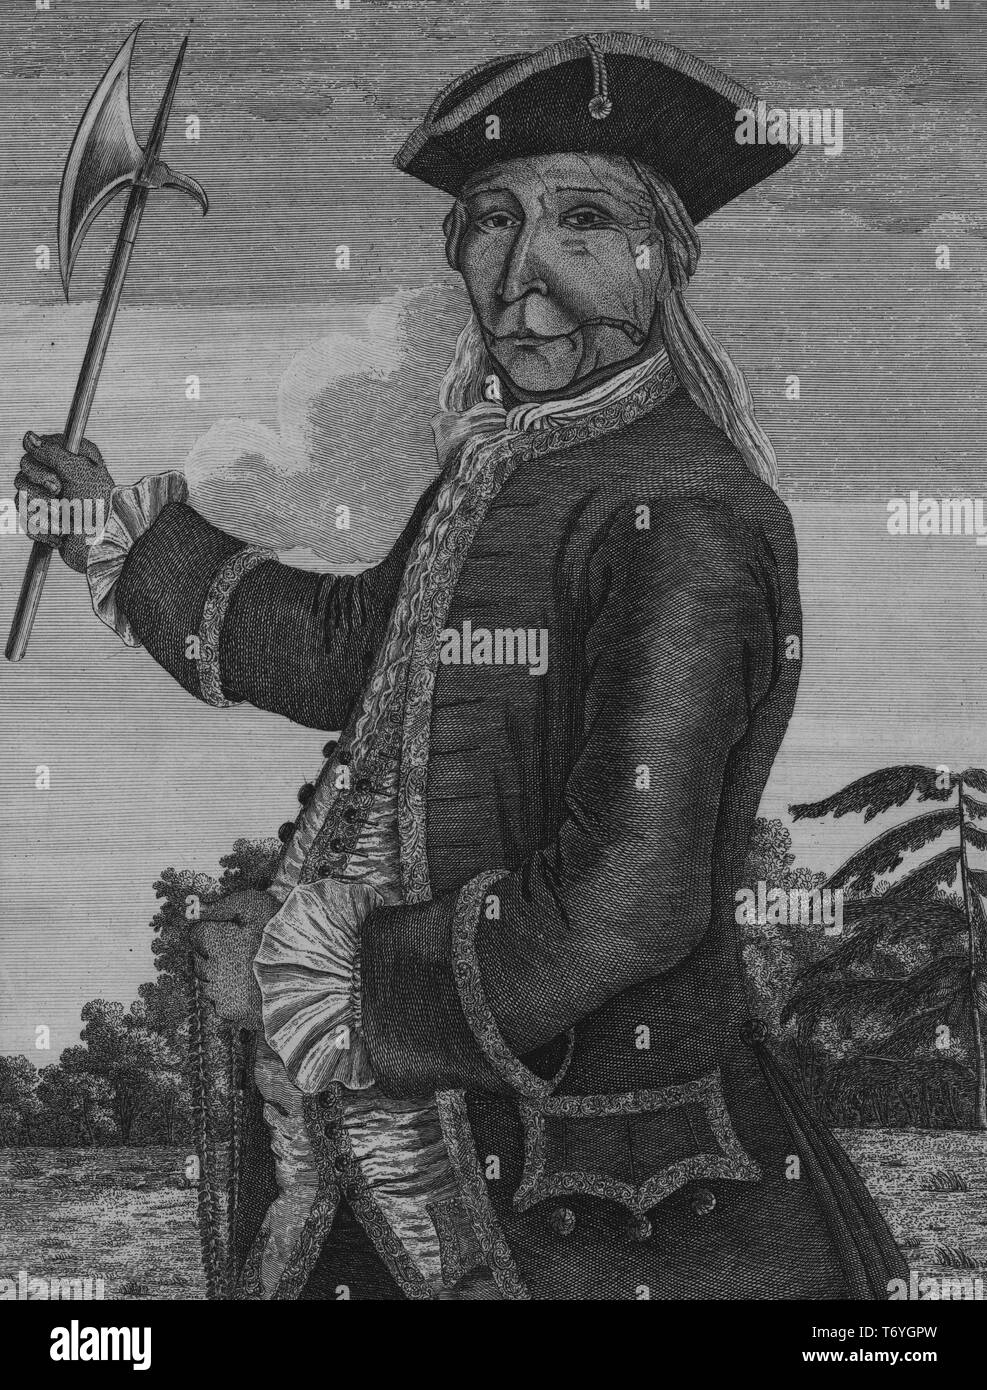 Engraved portrait of Brave Old Hendrick, the great Sachem, chief of the Mohawk Indians, 1755. From the New York Public Library. () Stock Photo